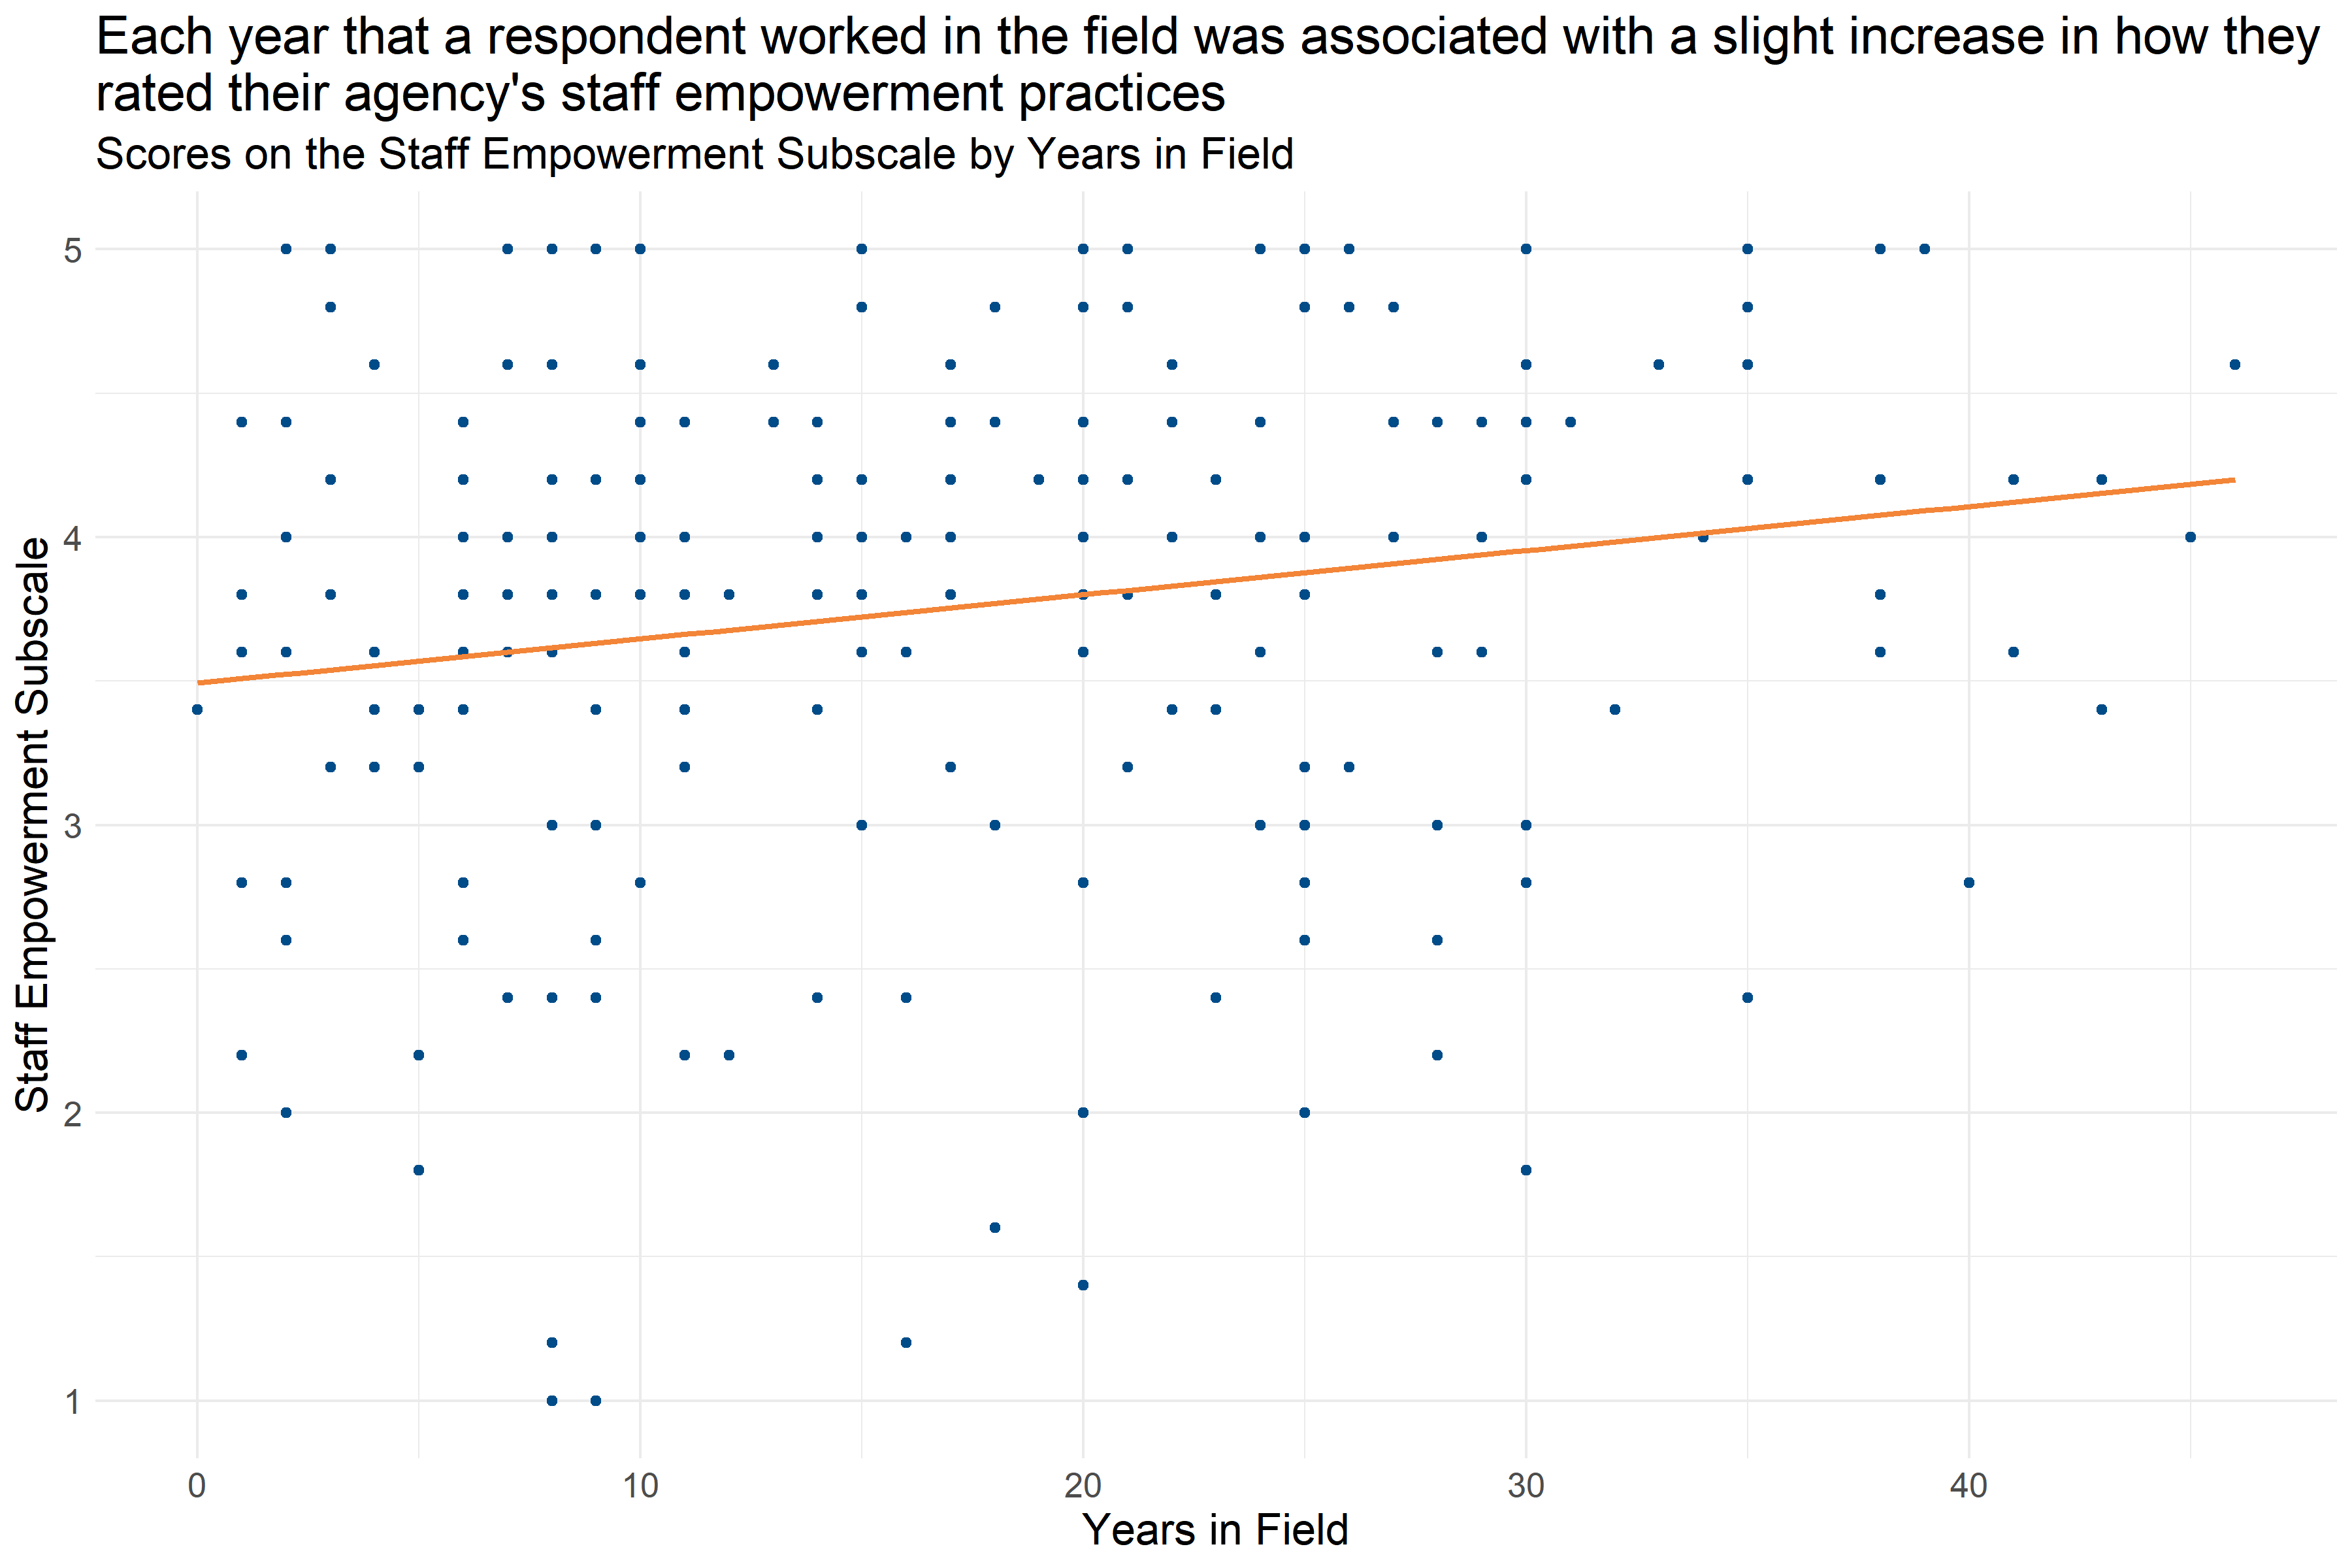 Scatter plot of Years in Field and Staff Empowerment Subscale Score